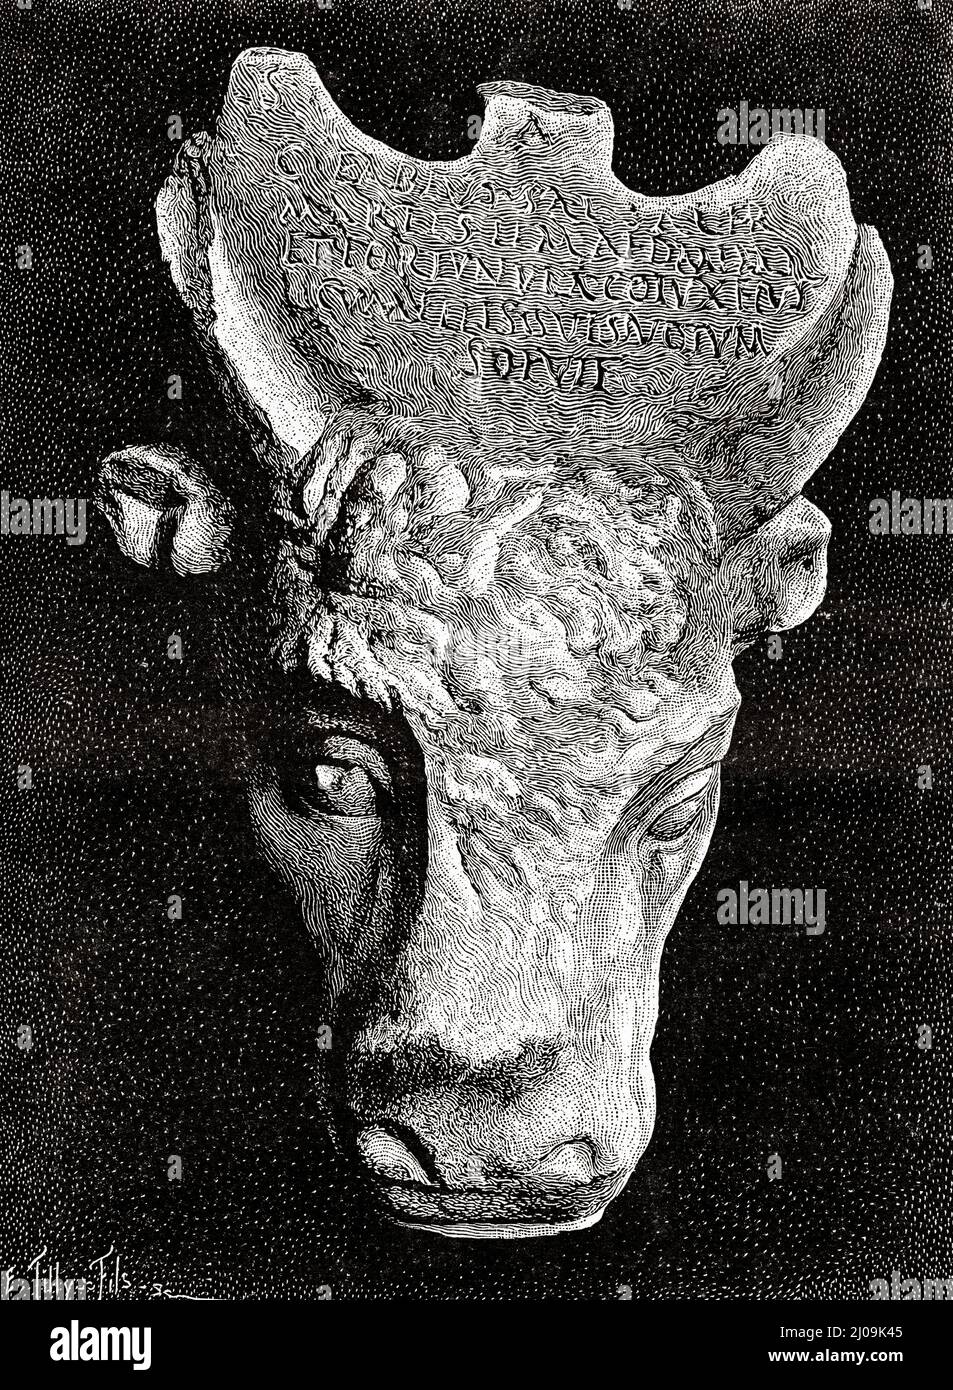 Votive bull to Saturn, found in the sanctuary of Jupiter Hammon. Archaeological Site of Carthage (Unesco World Heritage List, 1979), Tunisia. Old 19th century engraved illustration from La Nature 1899 Stock Photo